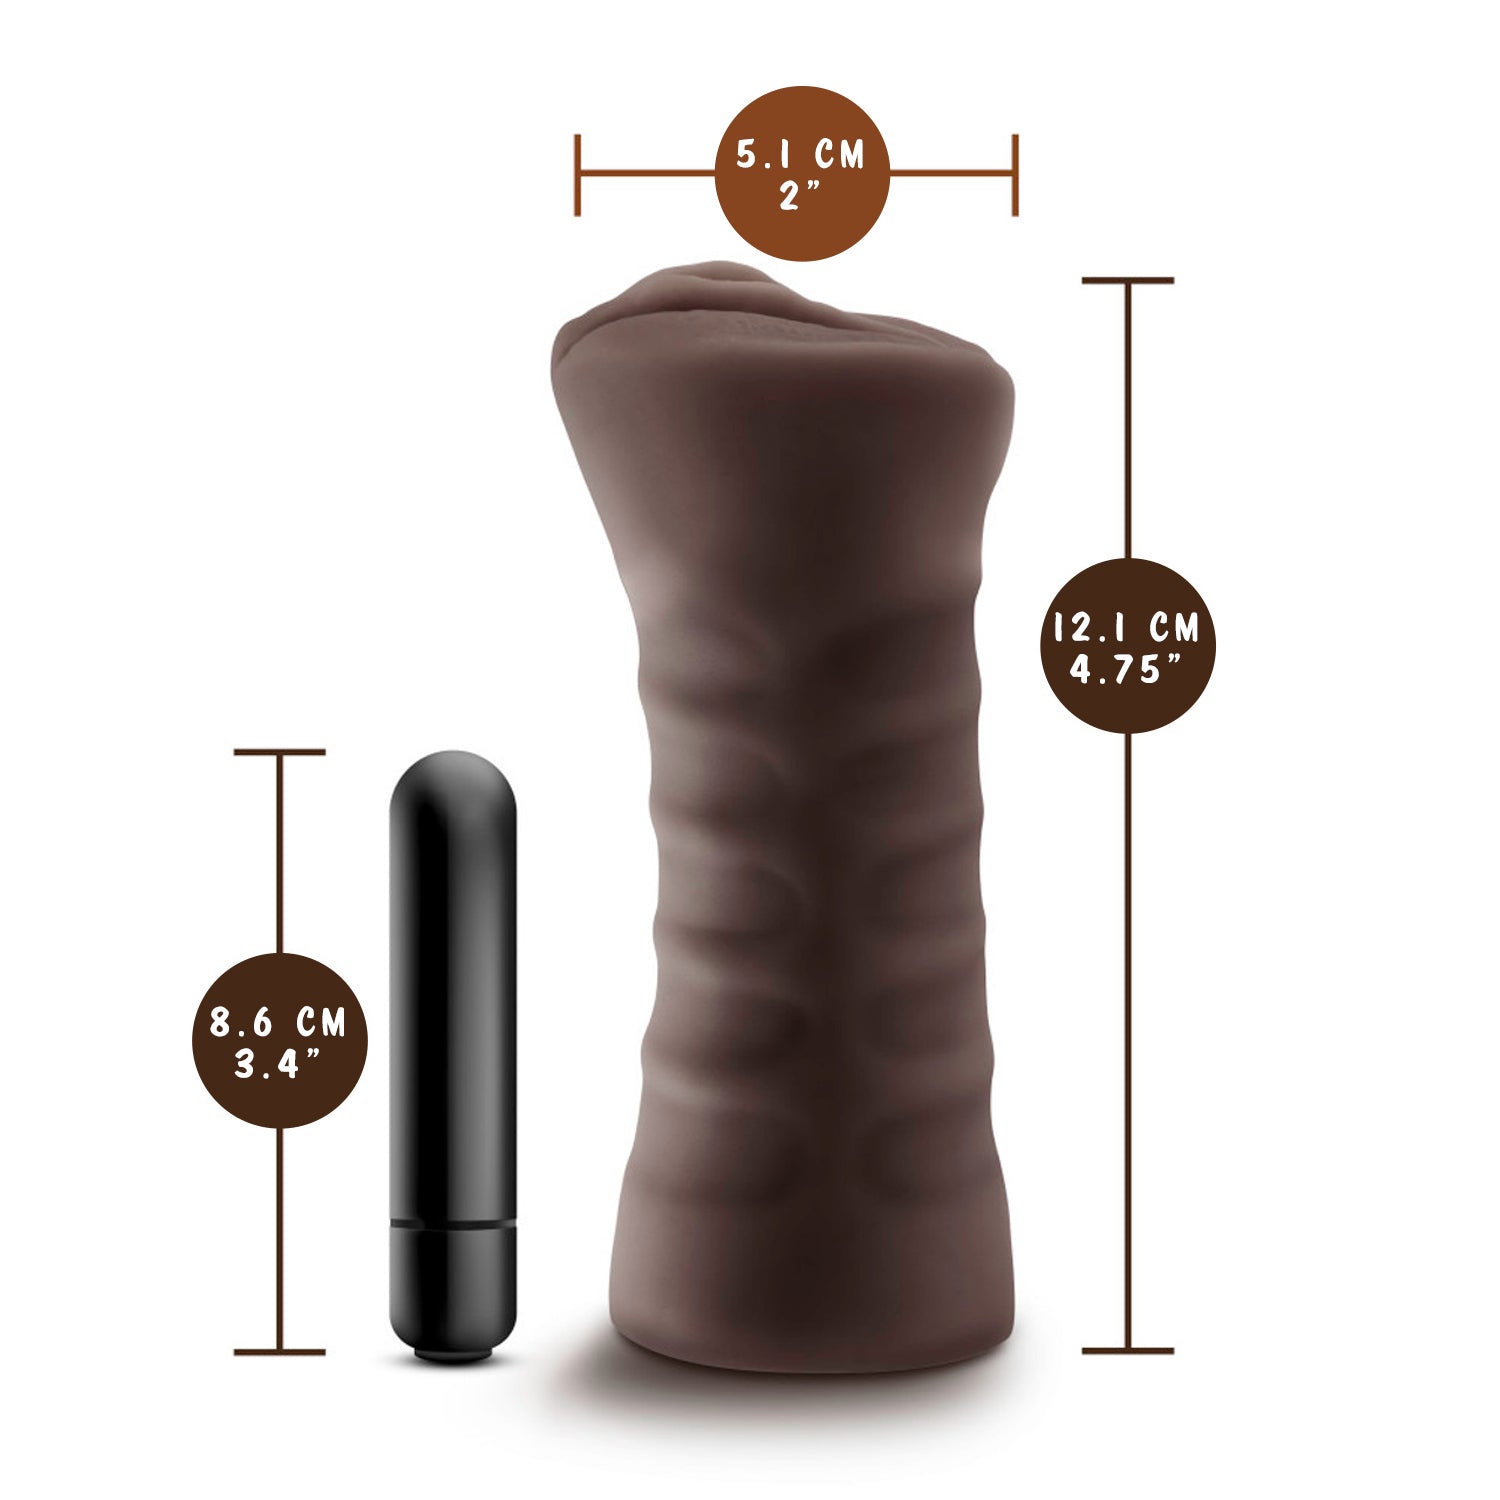 blush Hot Chocolate Brianna Vibrating Stroker measurements: Product width: 5.1 centimetres / 2 inches; Bullet length: 8.6 centimetres / 3.4 inches; Stroker length: 12.1 centimetres / 4.75 inches.